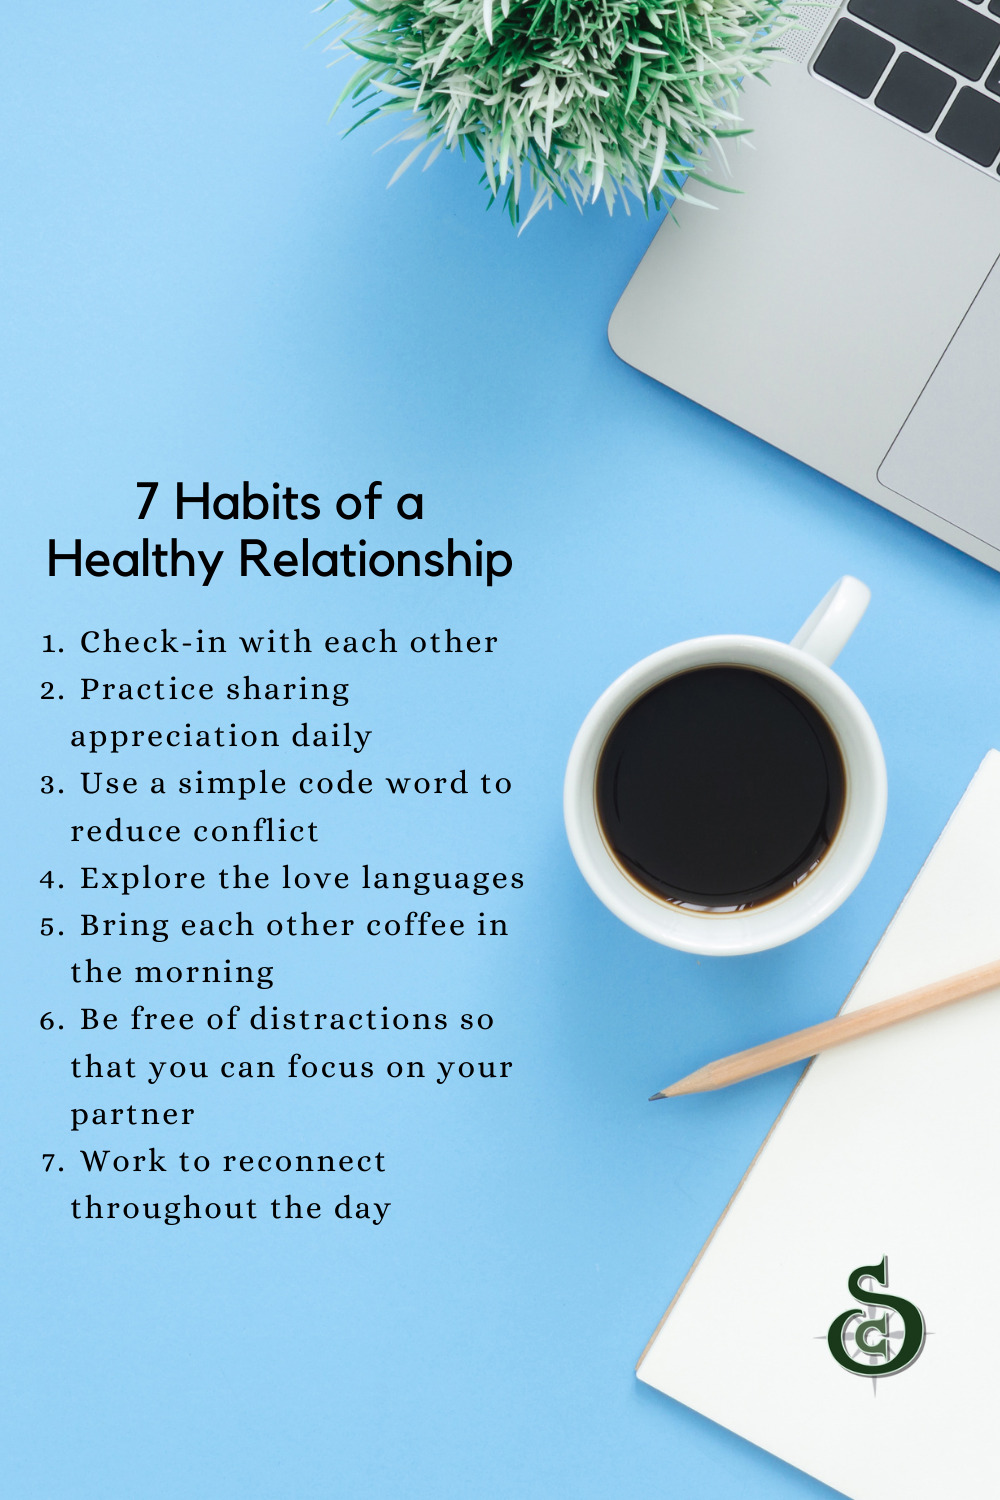 Ways To Have A Healthy Relationship And 7 Habits Of A Healthy Relationship To Practice.